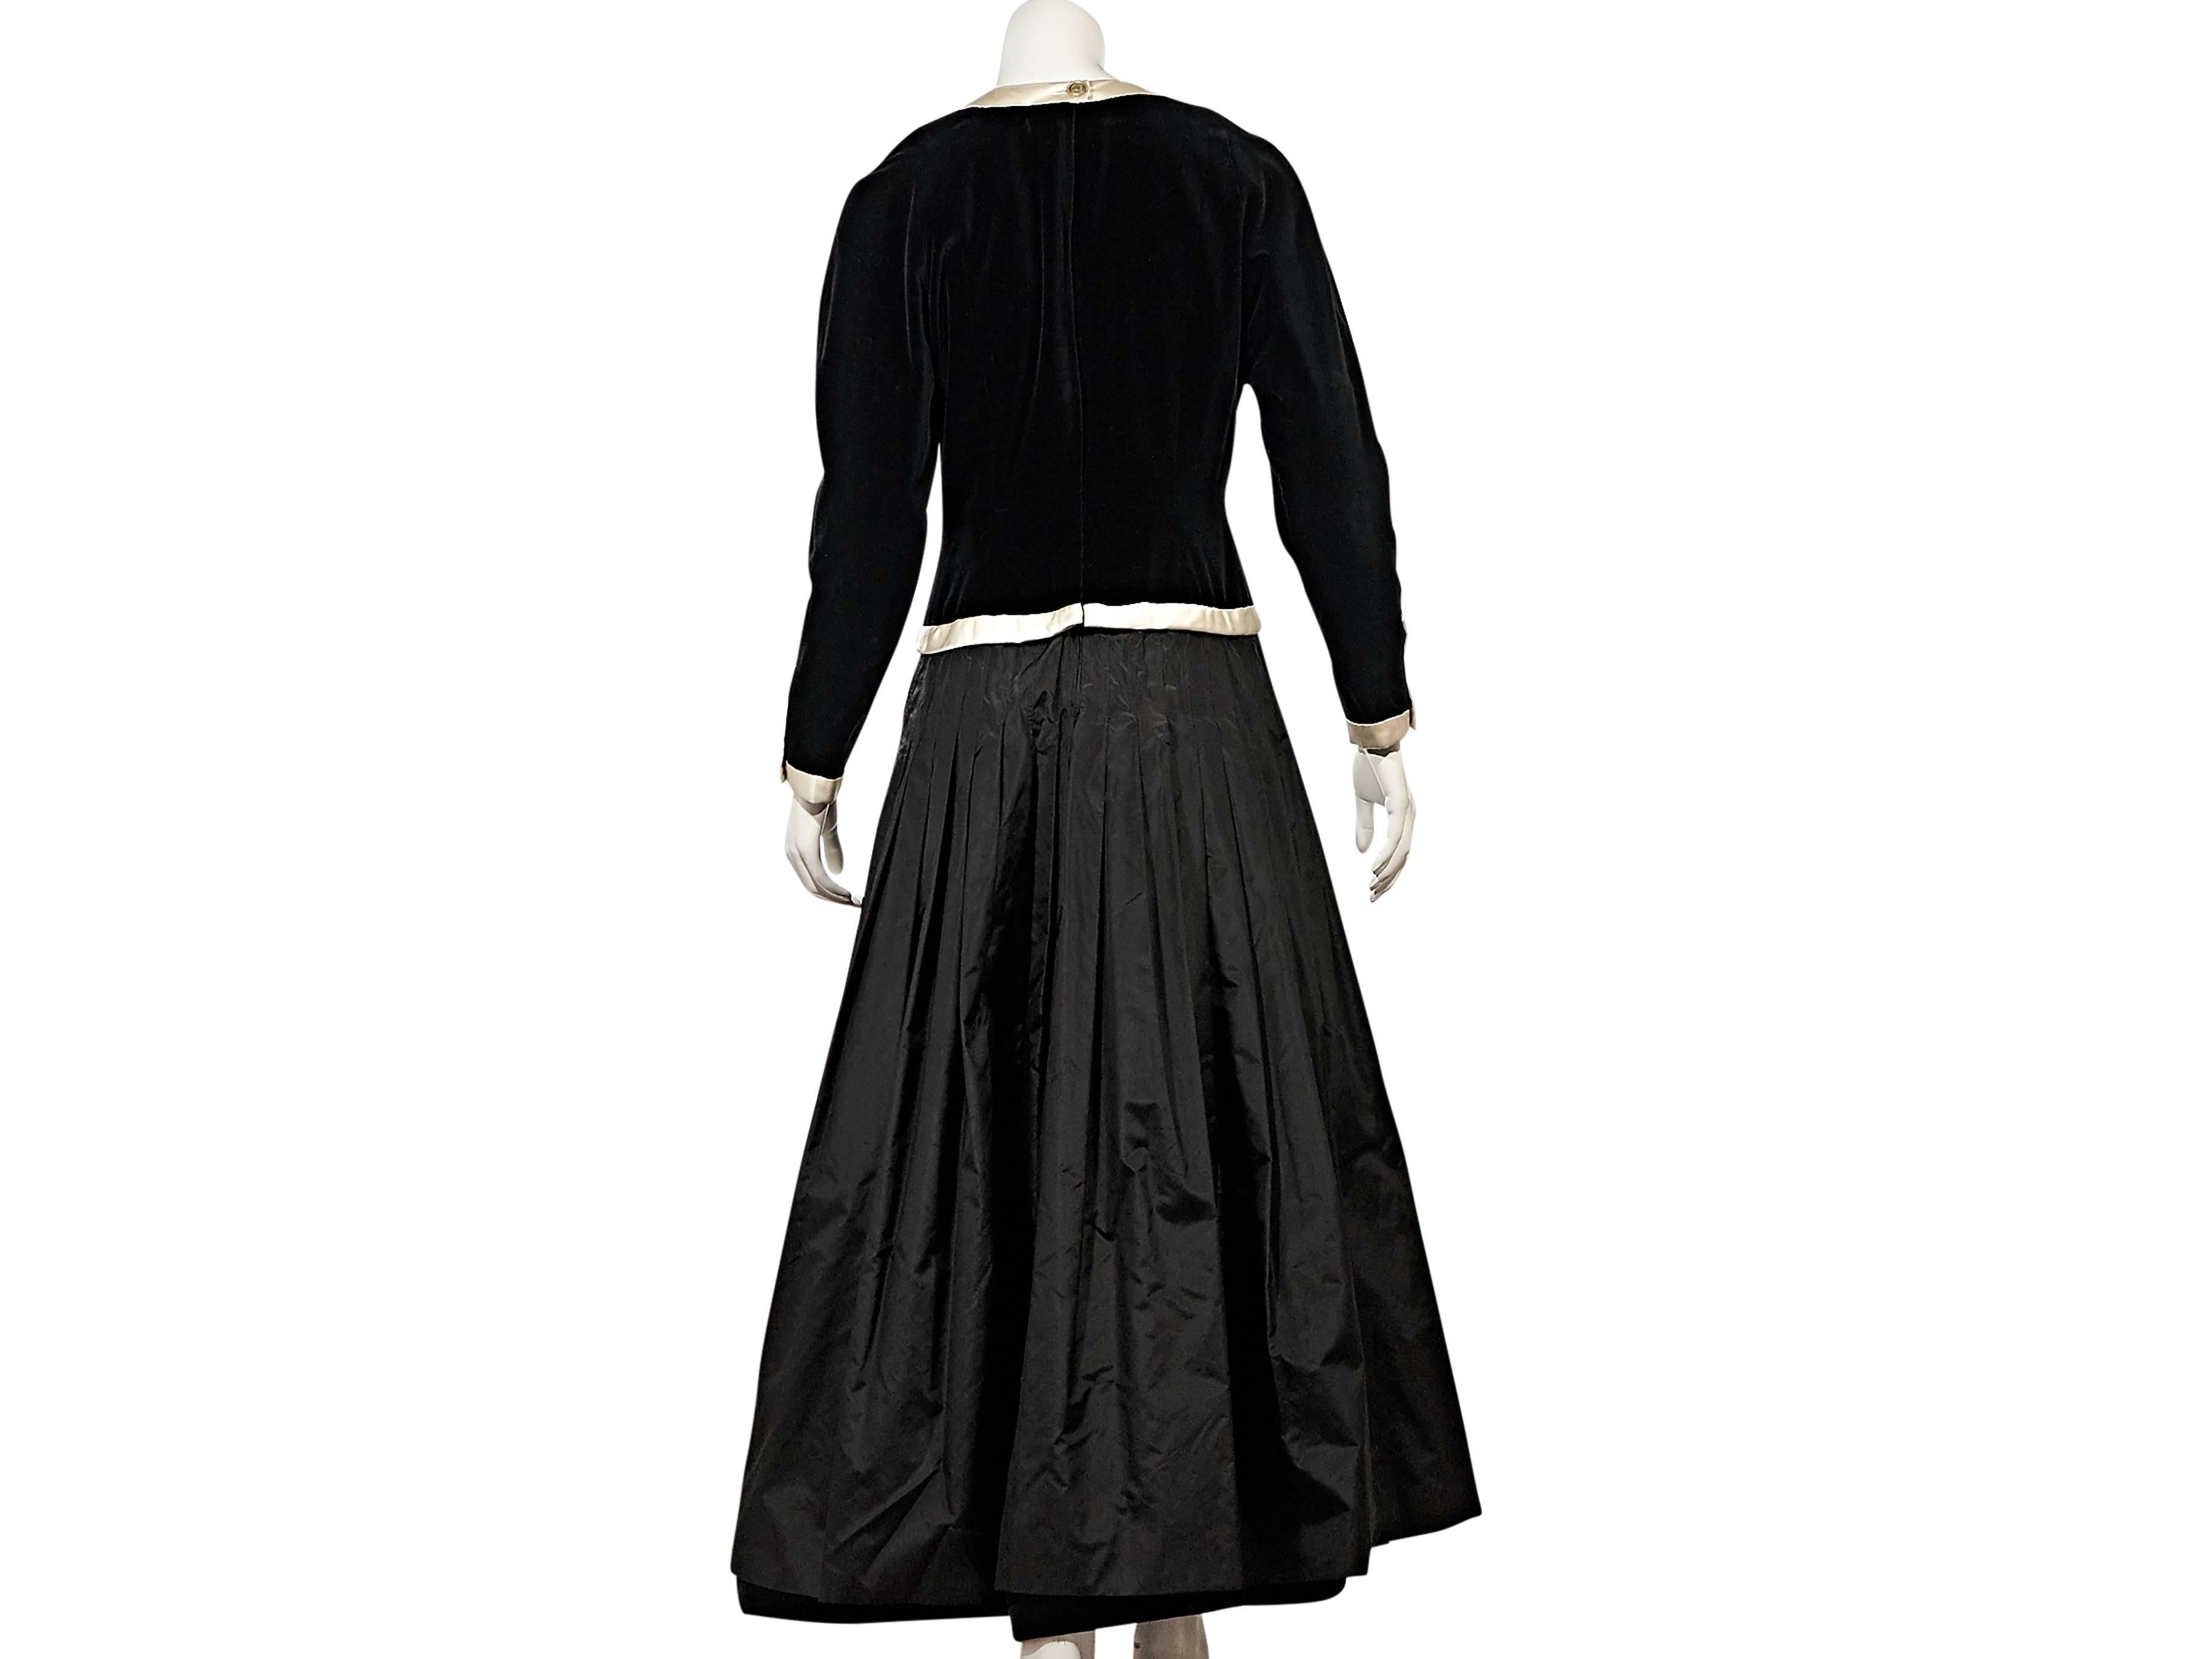 Product details:  Vintage black twofer dress by Chanel.  Designed as the look of separates.  Wide scoopneck.  Long sleeves.  Button-front closure.  Velvet bodice with trim.  Maxi pleated A-line skirting.     
Condition: Very good. 